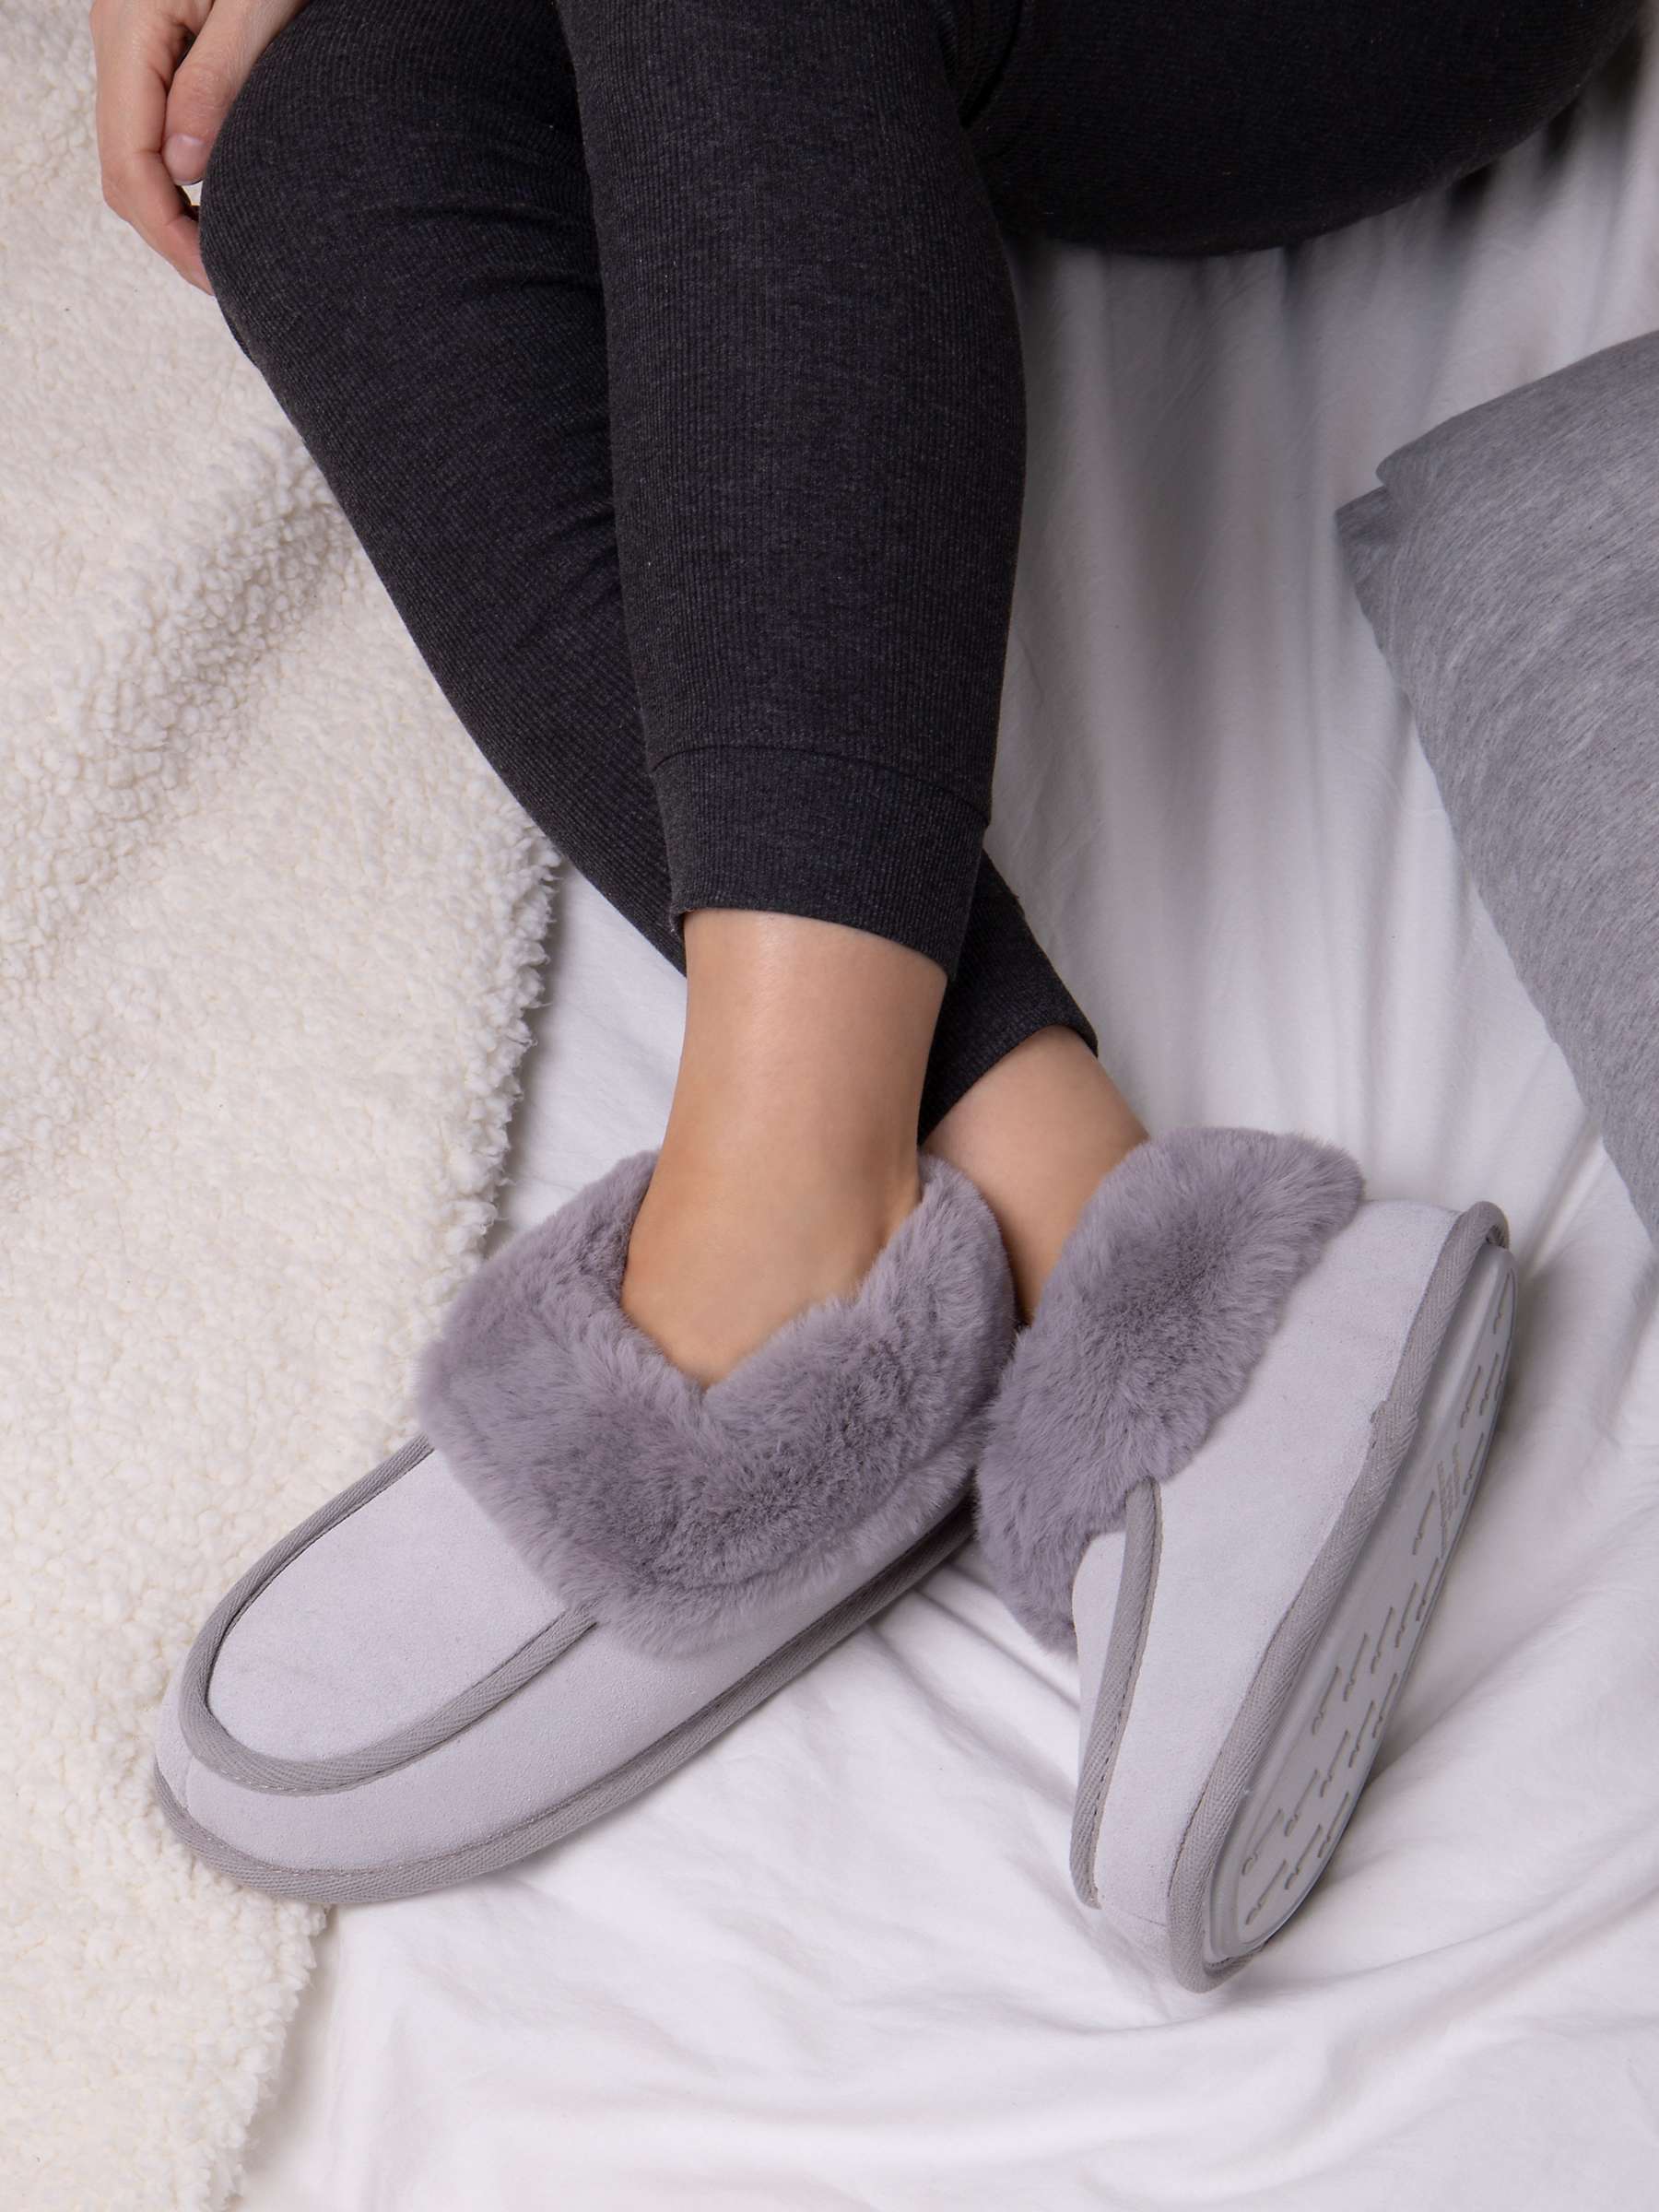 Buy totes Real Suede Moccasin Bootie Slippers Online at johnlewis.com